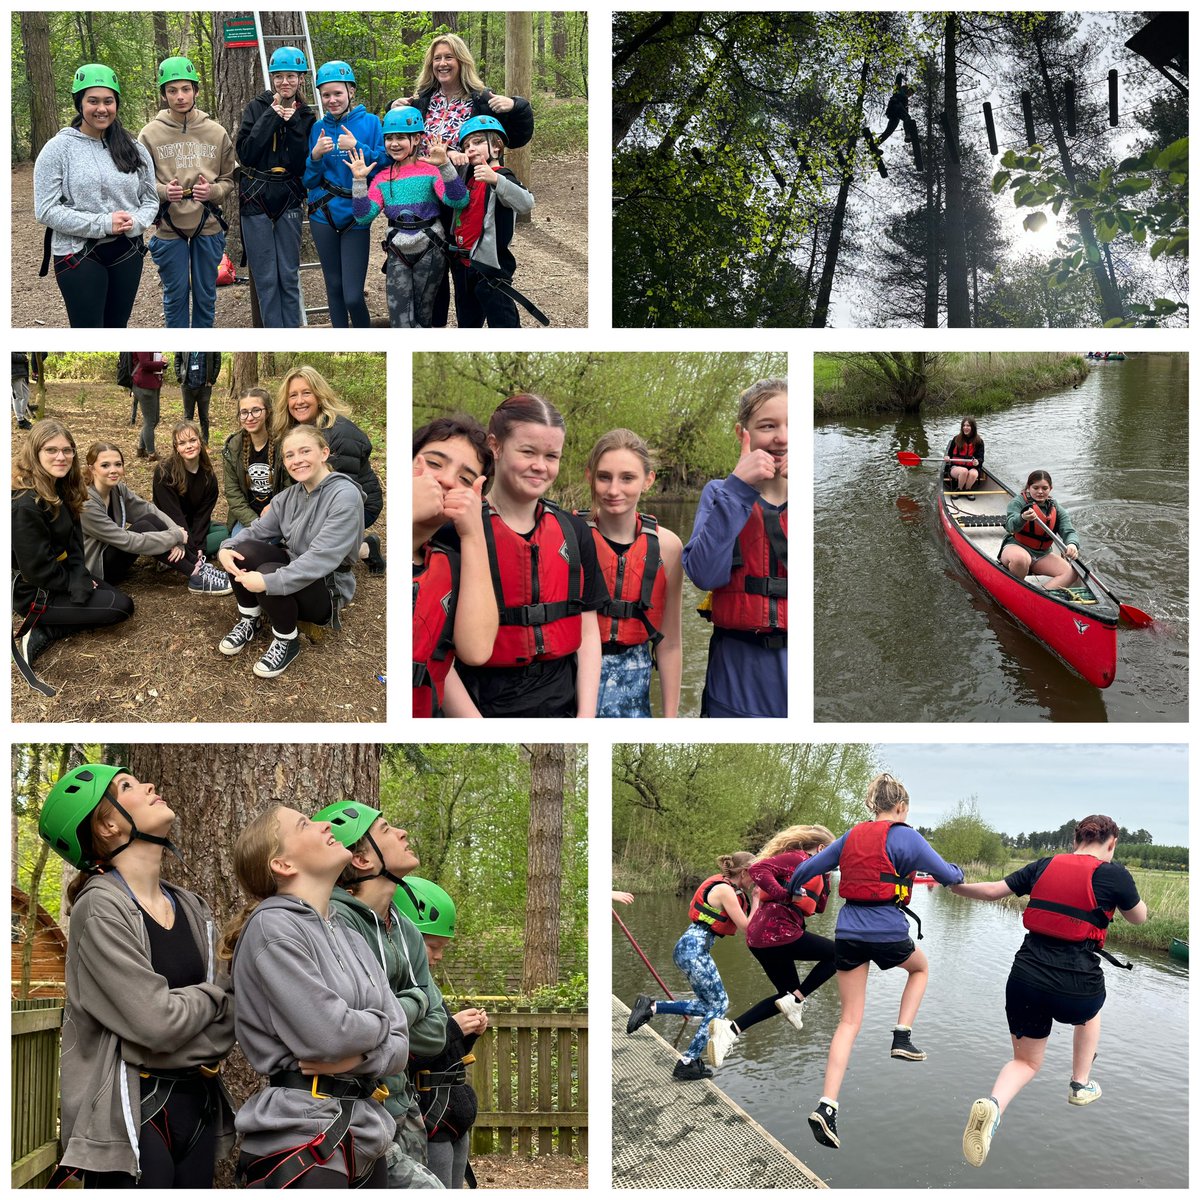 Reach for the Skies! Nearly 70 young carers from across Norfolk and Suffolk supported by @NSFTtweets and carer voluntary groups. I loved seeing you having fun, being so daring and hearing all about the friendships and confidence you are building. You ARE amazing!